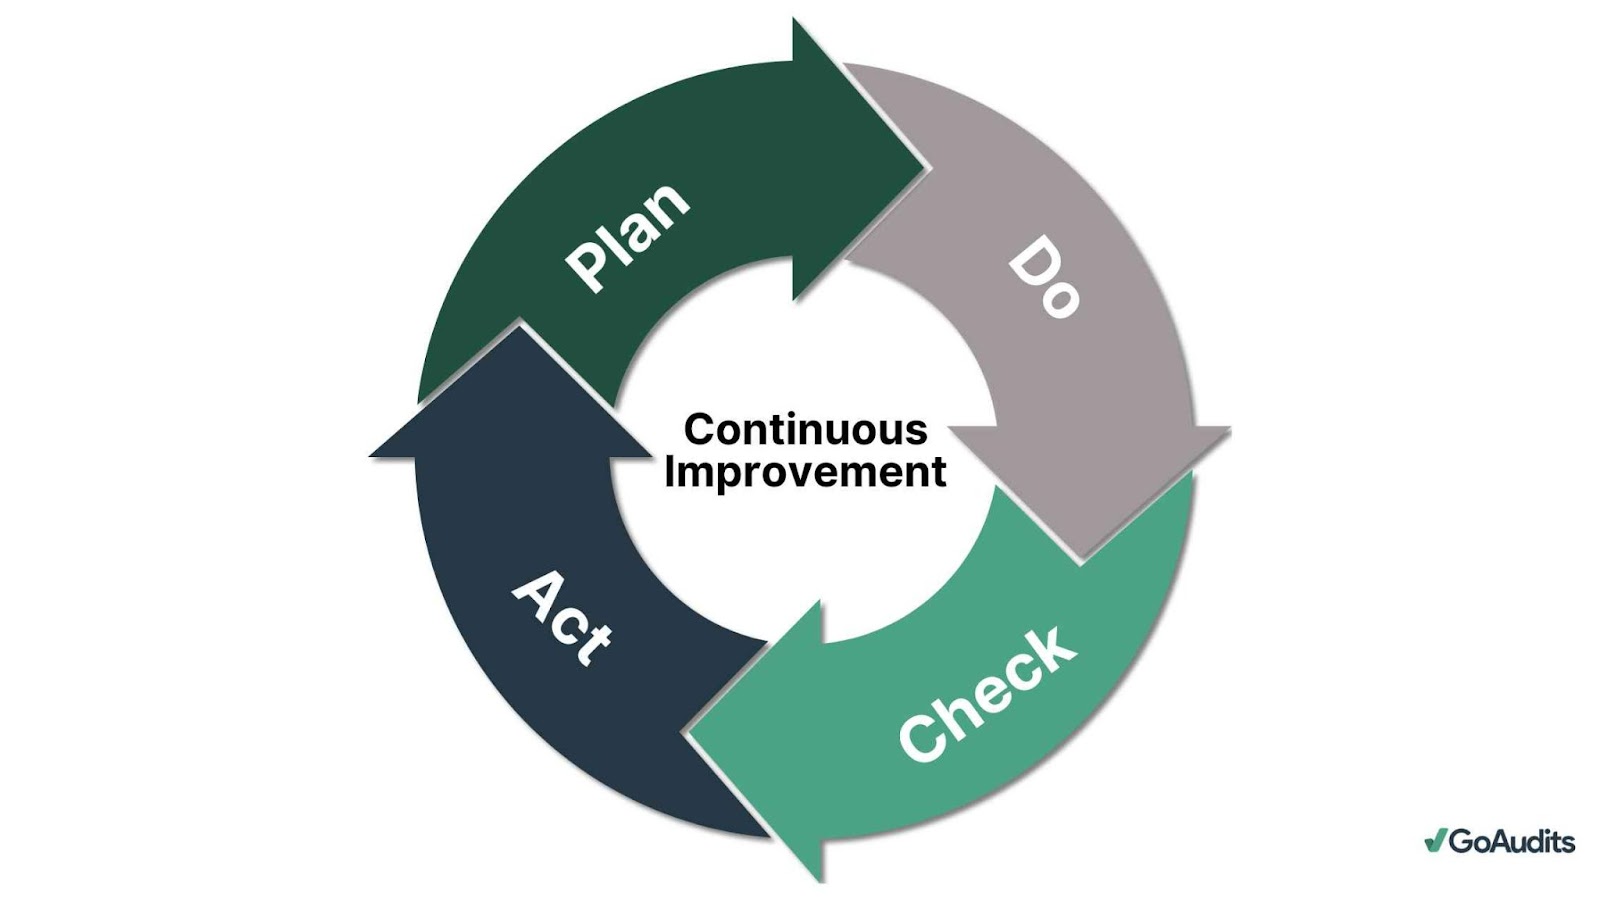 Why is PDCA a Cycle?